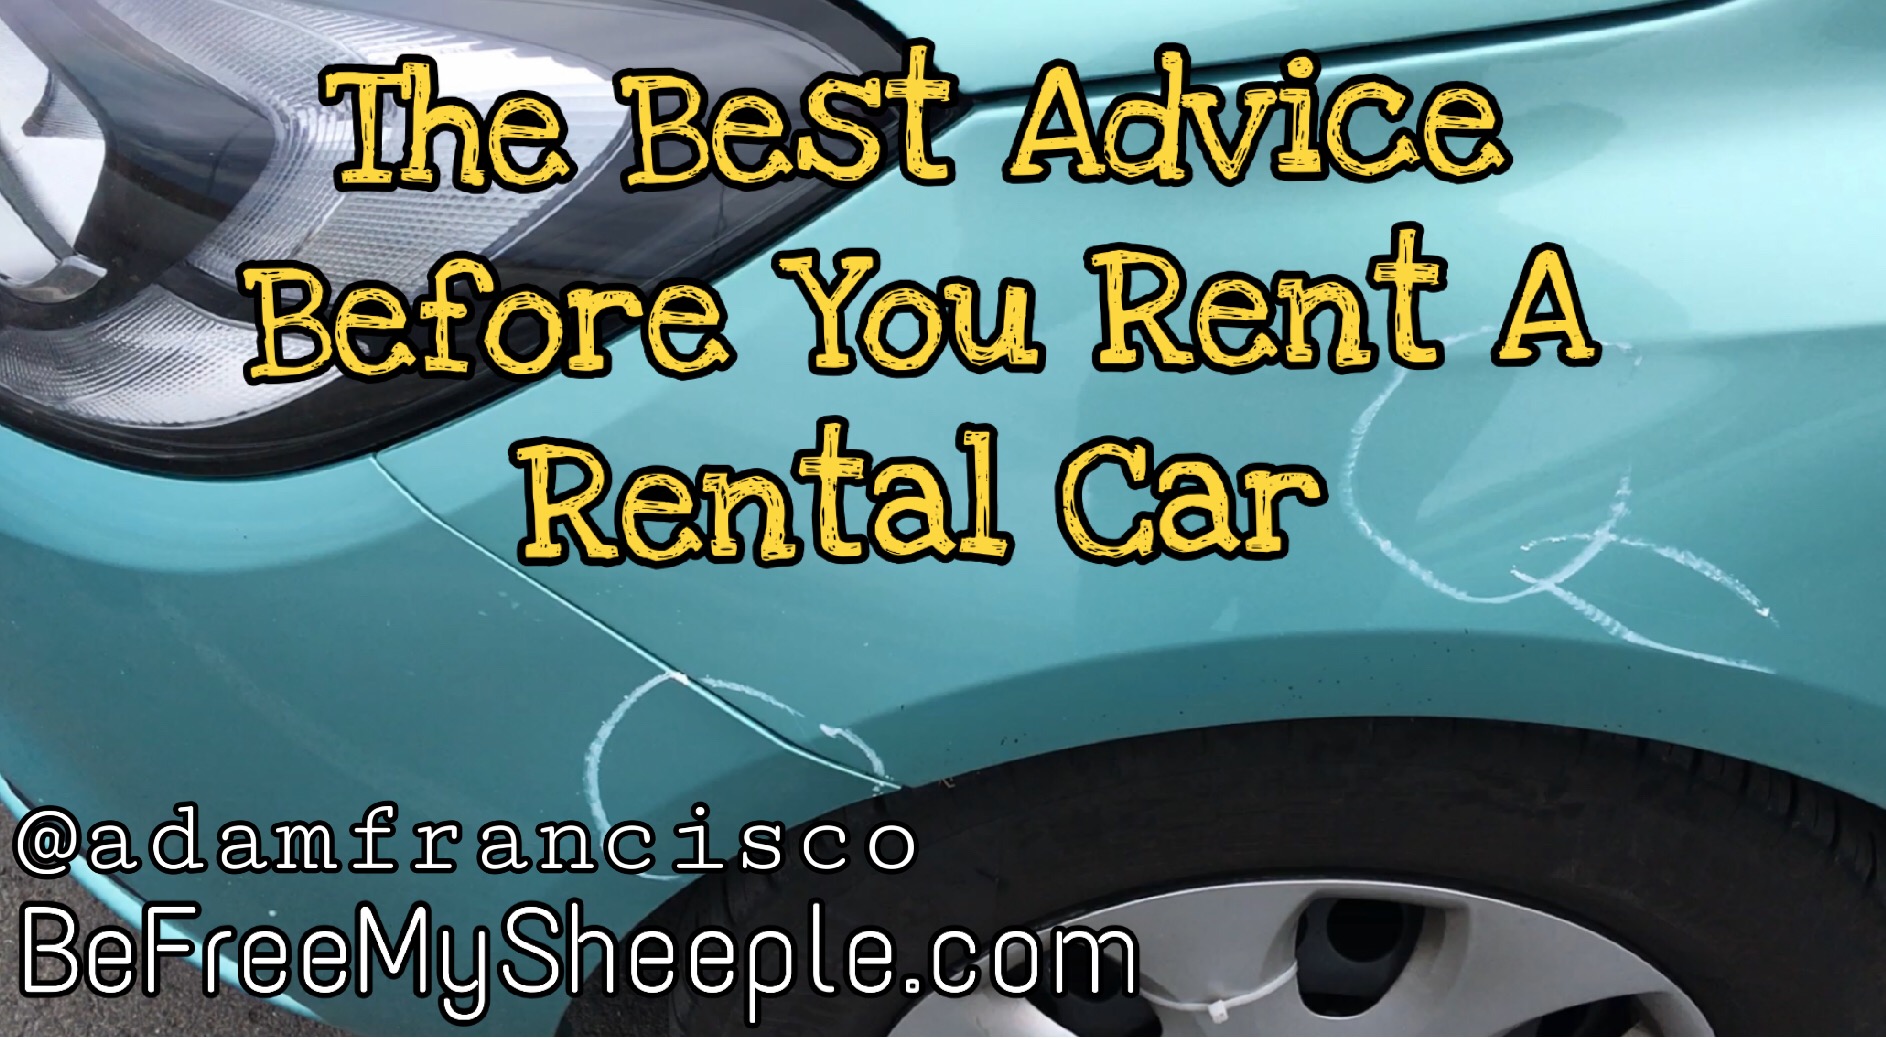 The Best Advice Before You Rent a Rental Car